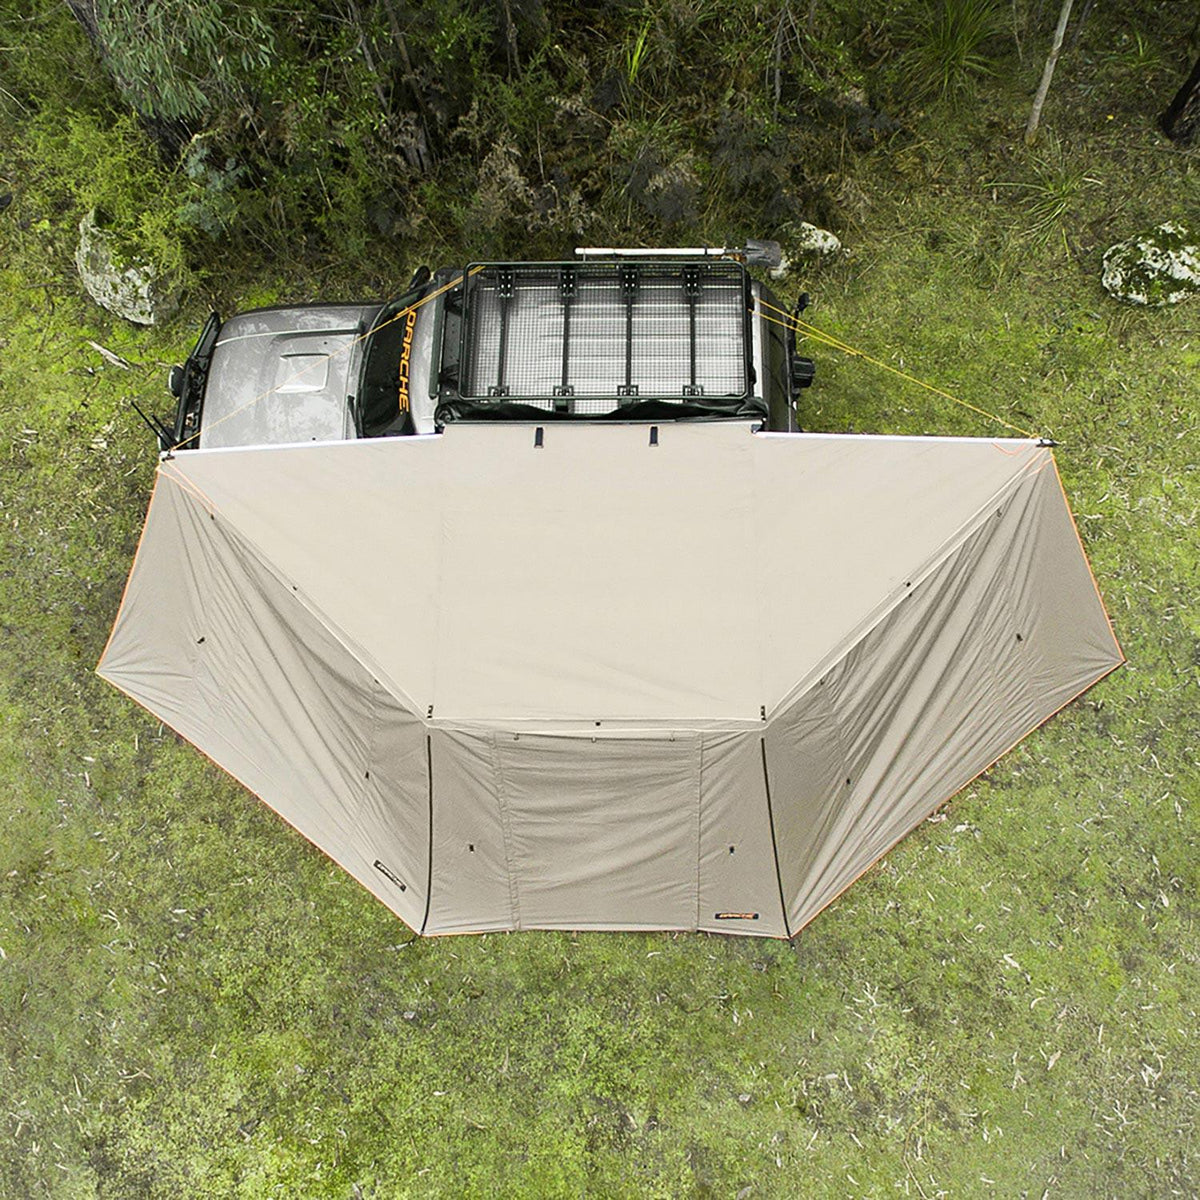 Eclipse 180 Awning Gen 2  Shelters Darche- Overland Kitted